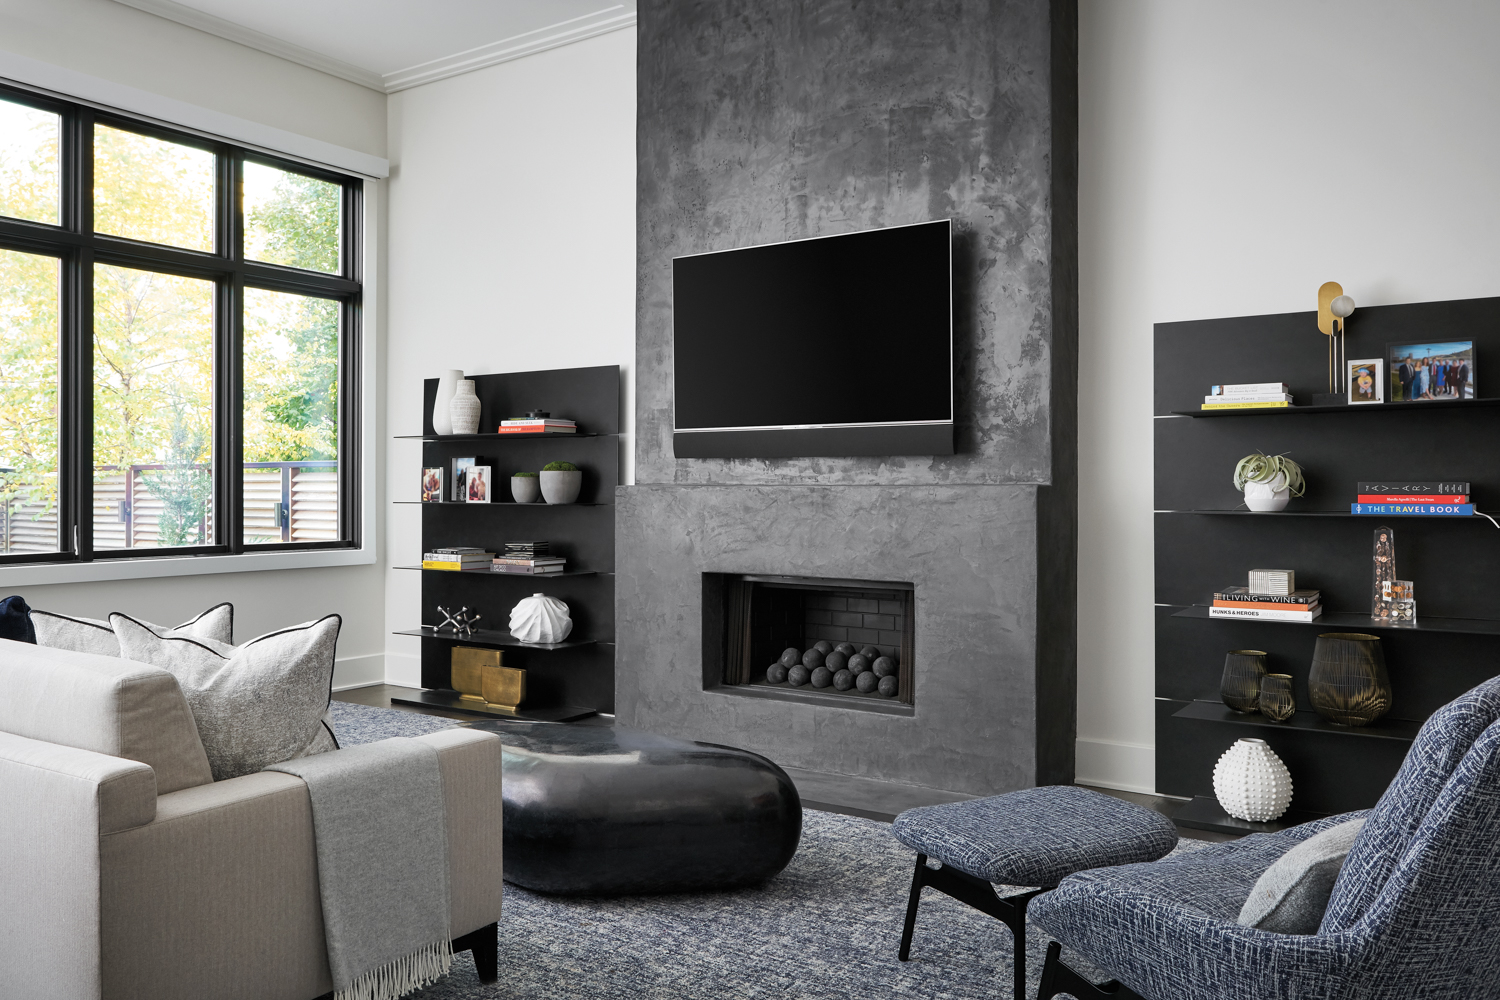 A muted living room in gray and black tones including a concrete fireplace, a black stone coffee table and steel bookcases.